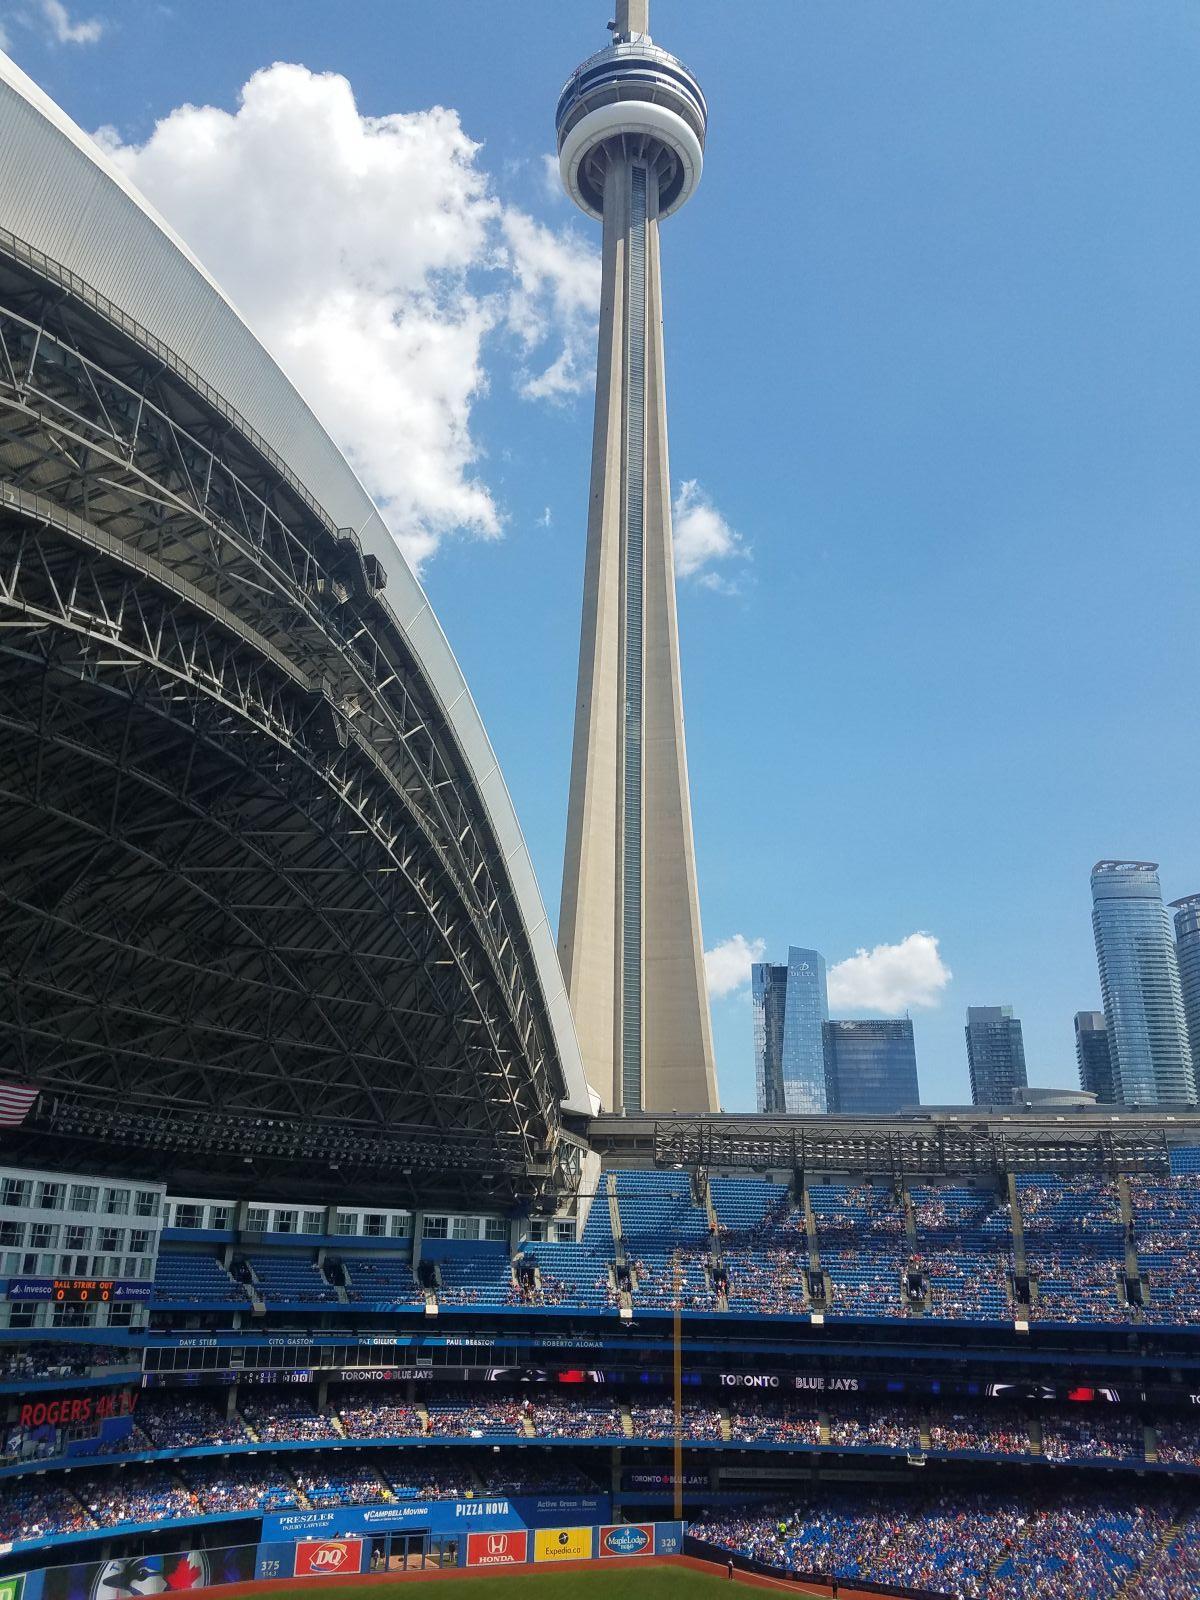 Found this sign inside the Rogers Centre : r/toronto